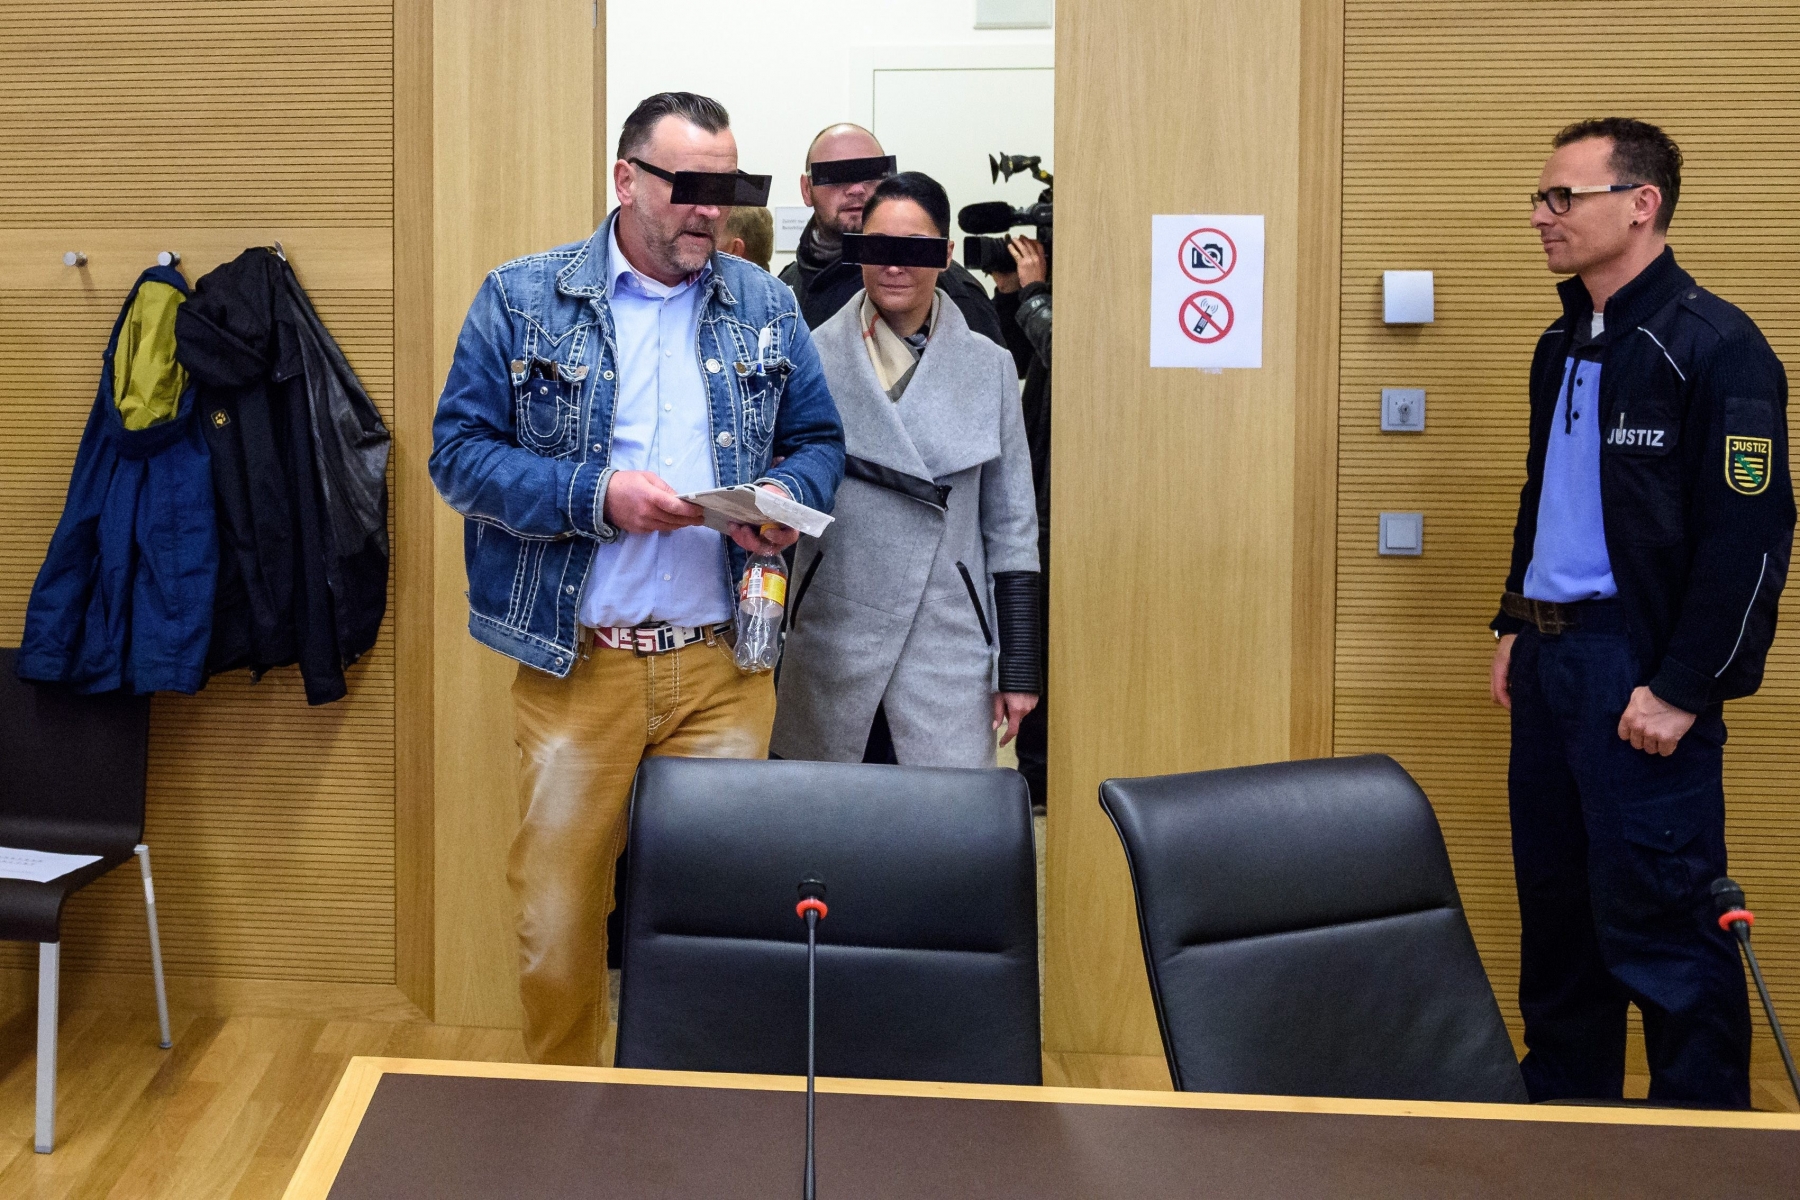 epa05266540 Lutz Bachmann (L), co-founder of Patriotic Europeans Against the Islamisation of the West (PEGIDA), wears an angular pair of sunglasses next to his wife Vicky Bachmann (C) as his trial begins at the district court in Dresden, Germany, 19 April 2016. The public prosecutor's office has charged 43-year-old Bachmann with incitement of hatred over Facebook posts on refugees from September 2014.  EPA/JENS†SCHLUETER / POOL GERMANY BACHMANN TRIAL